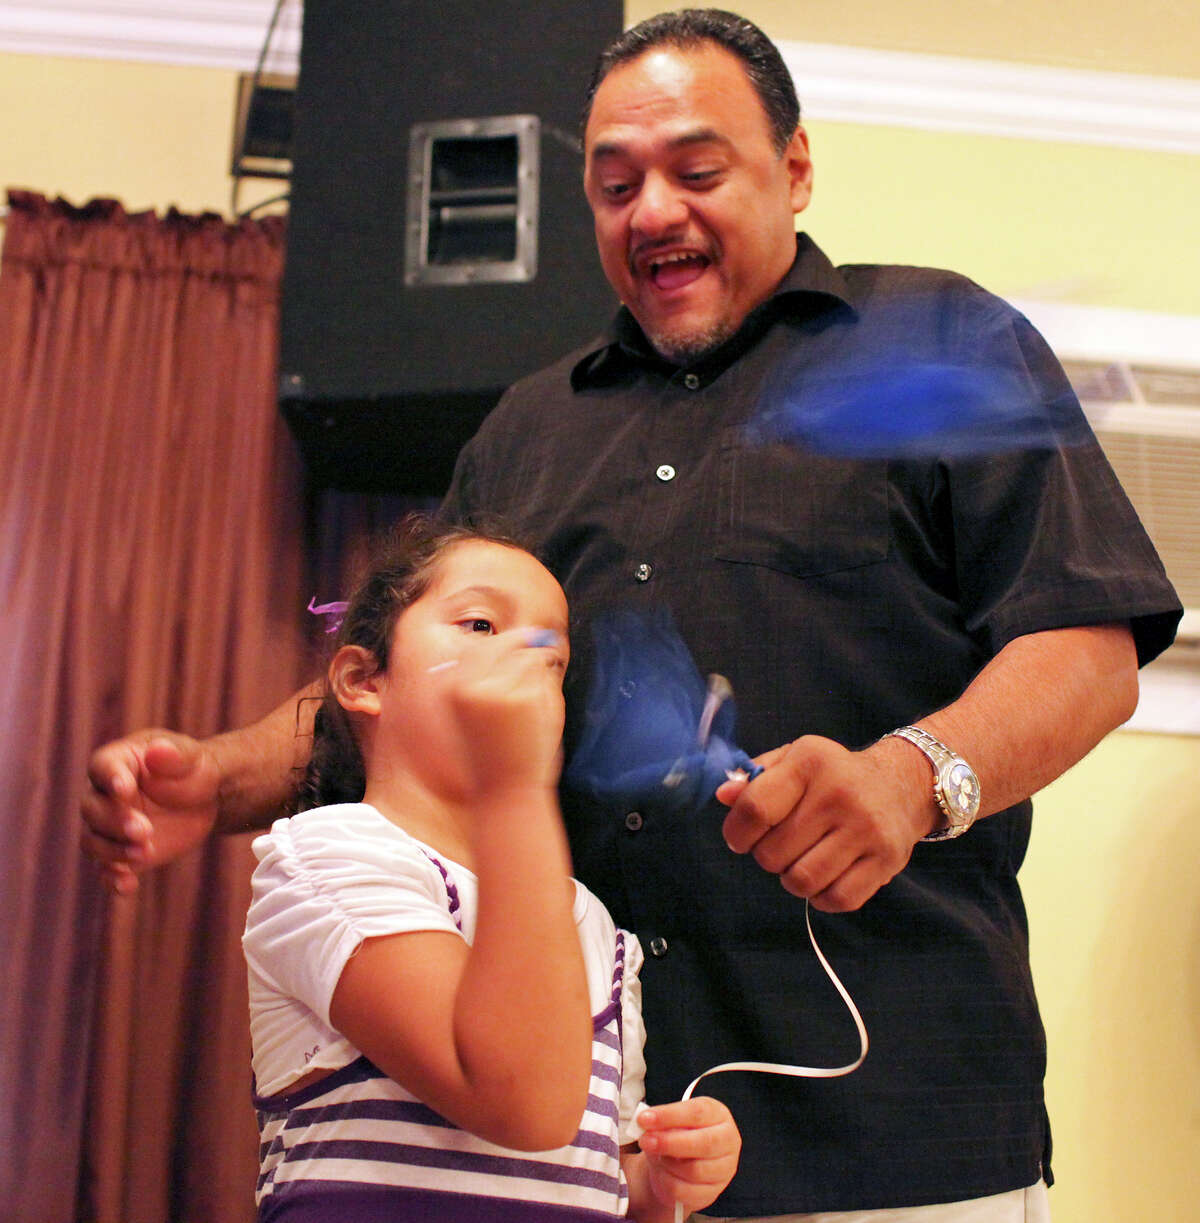 Ernest Alvarado (top) reacts as his daughter Alisandra Alvarado, 5, pops a balloon with money inside during a service held Sunday Aug. 19, 2012 at the River Worship Center. They each found $20 in balloons.